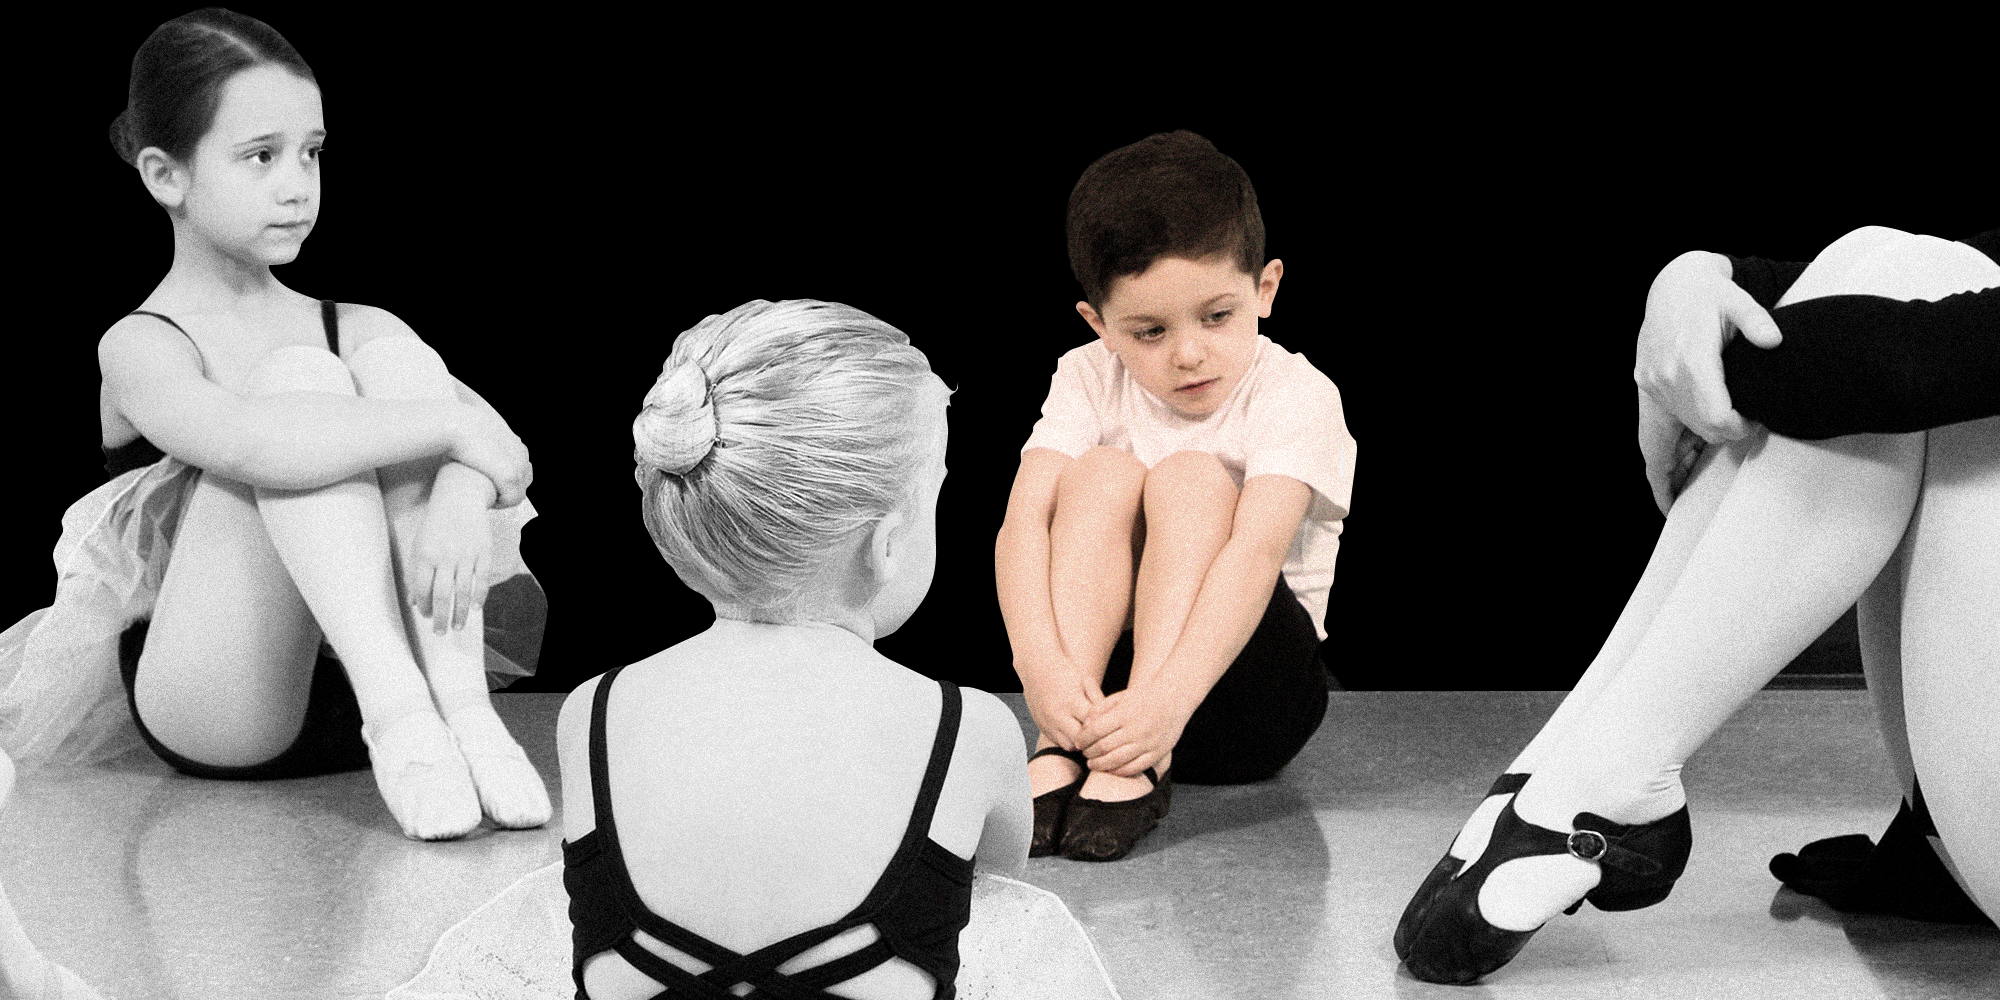 How To Stop Toxic Masculinity And Mass Shootings By Raising Boys To Embrace Femininity